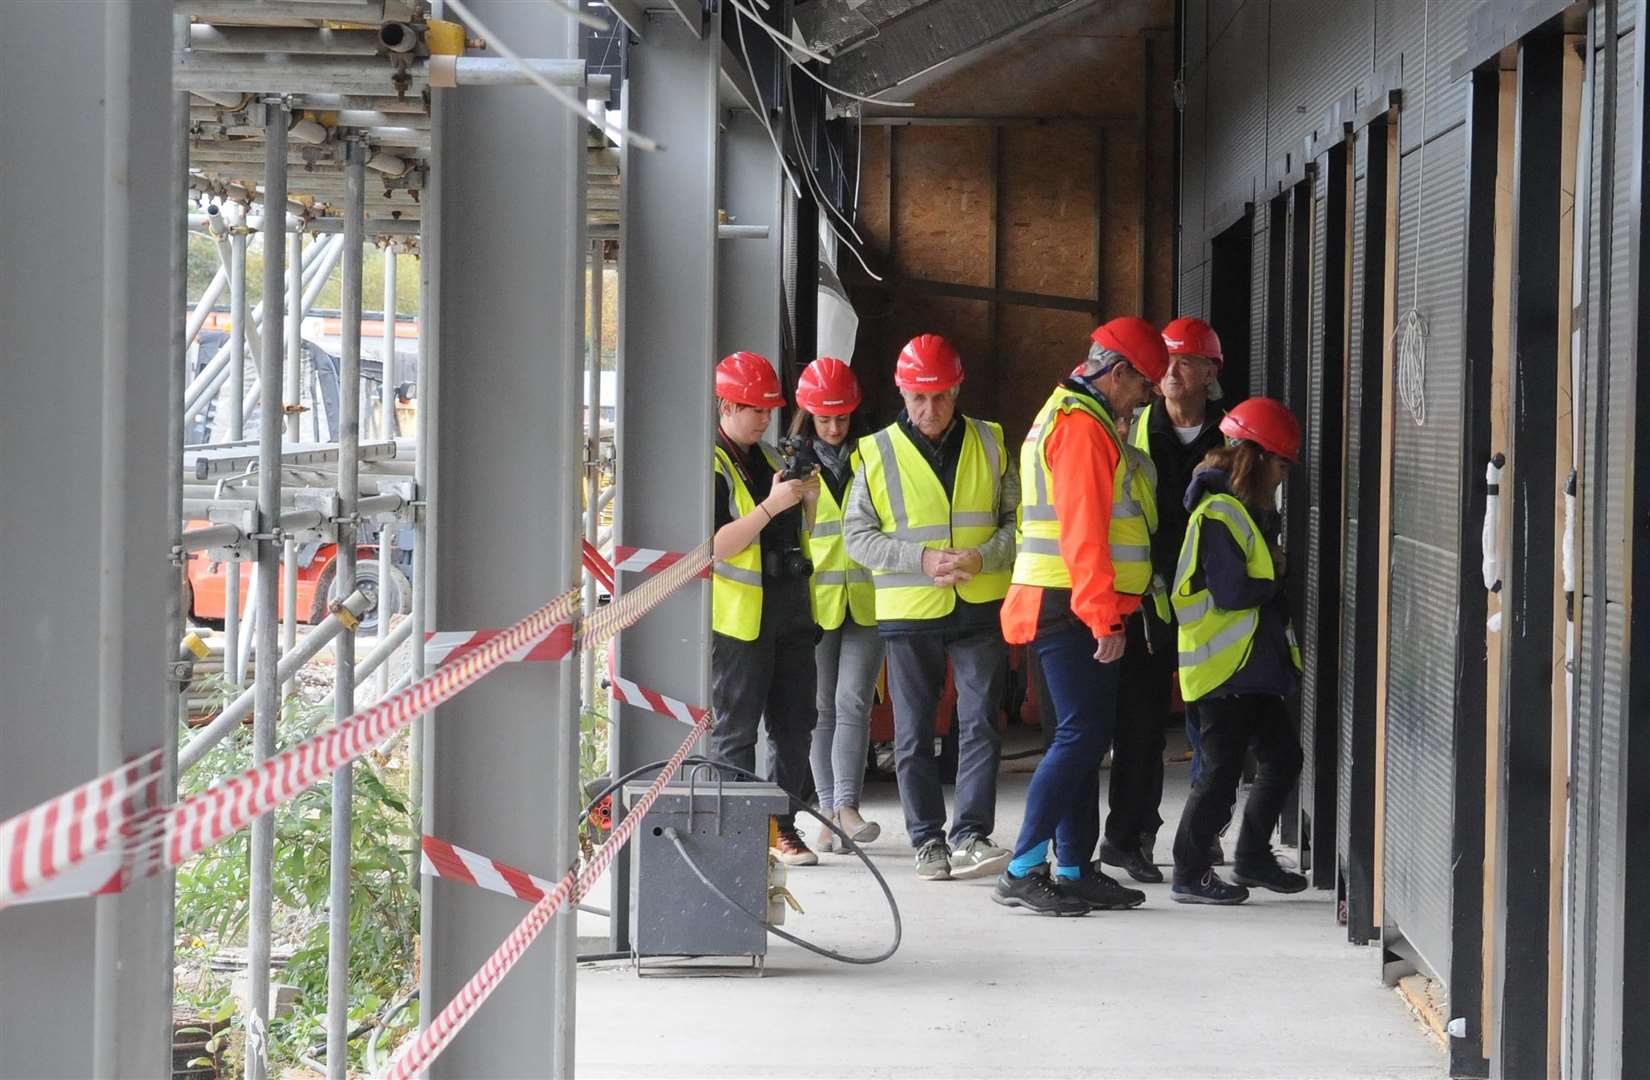 Visitors were shown around the site during an open day in November 2018